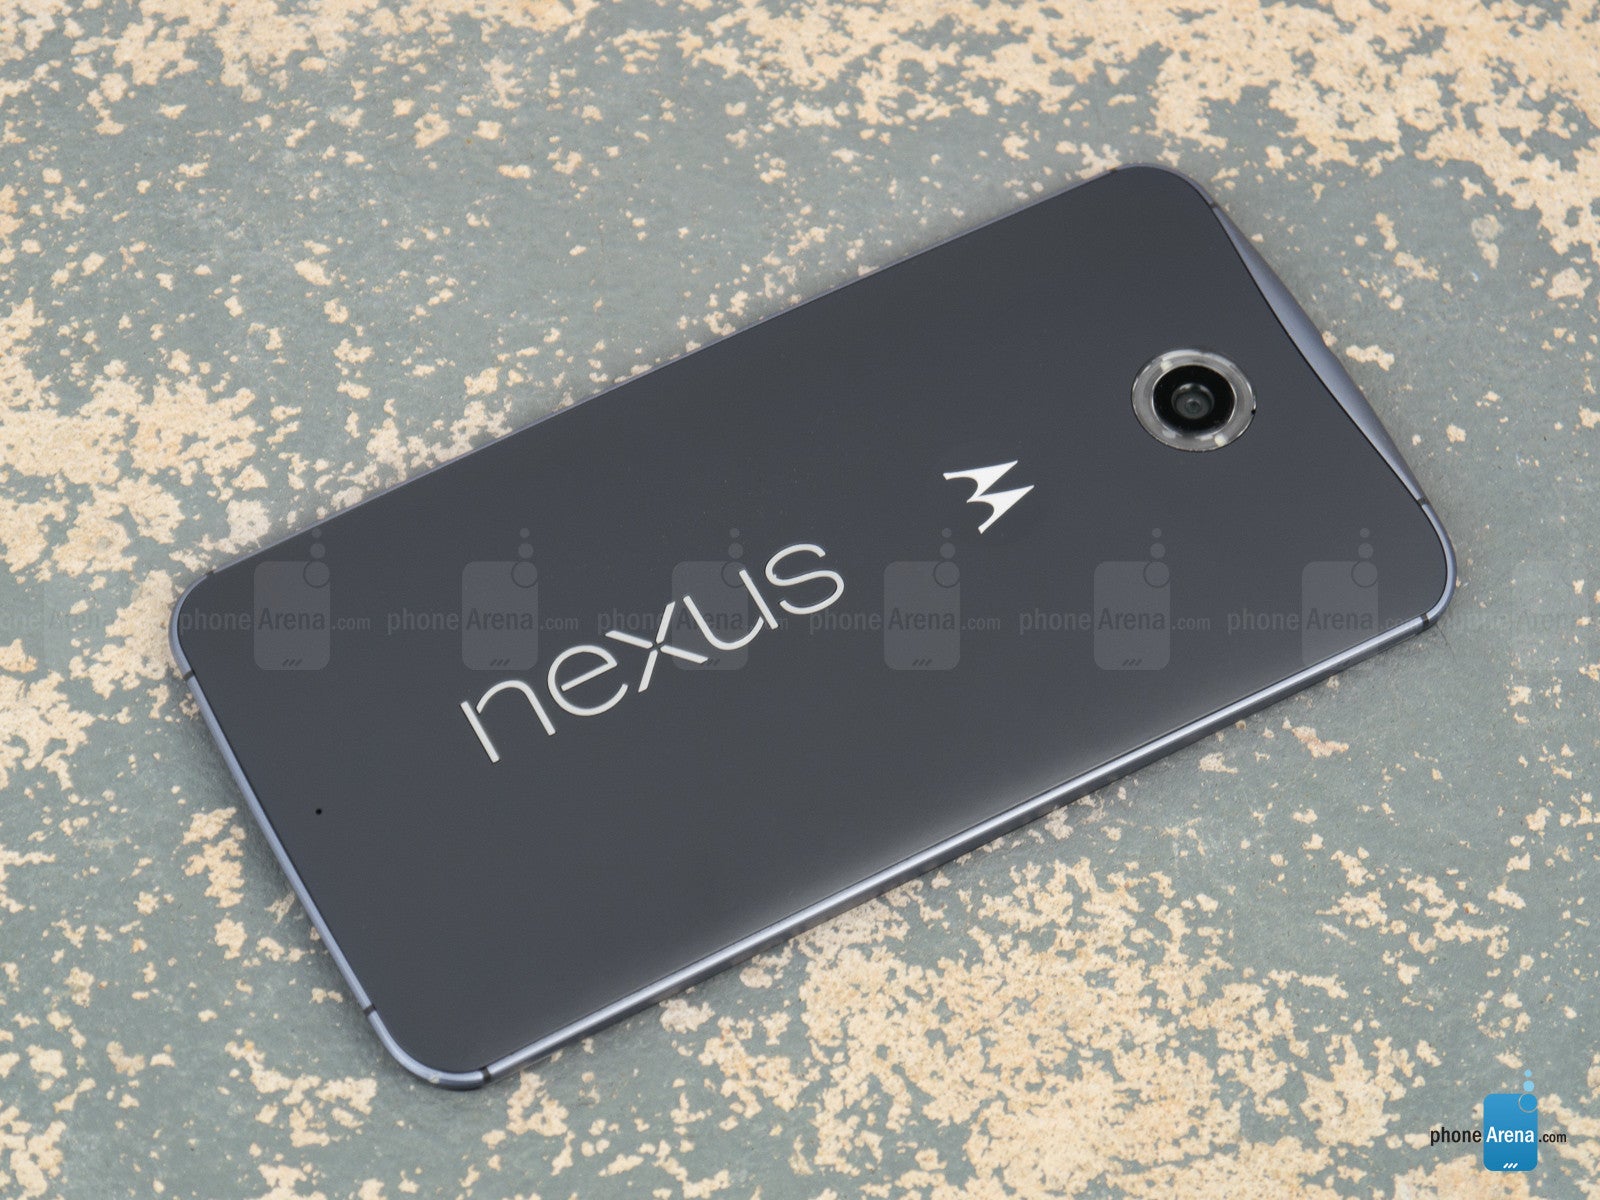 Android 7.1.1 Nougat rolls out to Nexus 6, factory image and OTA files released